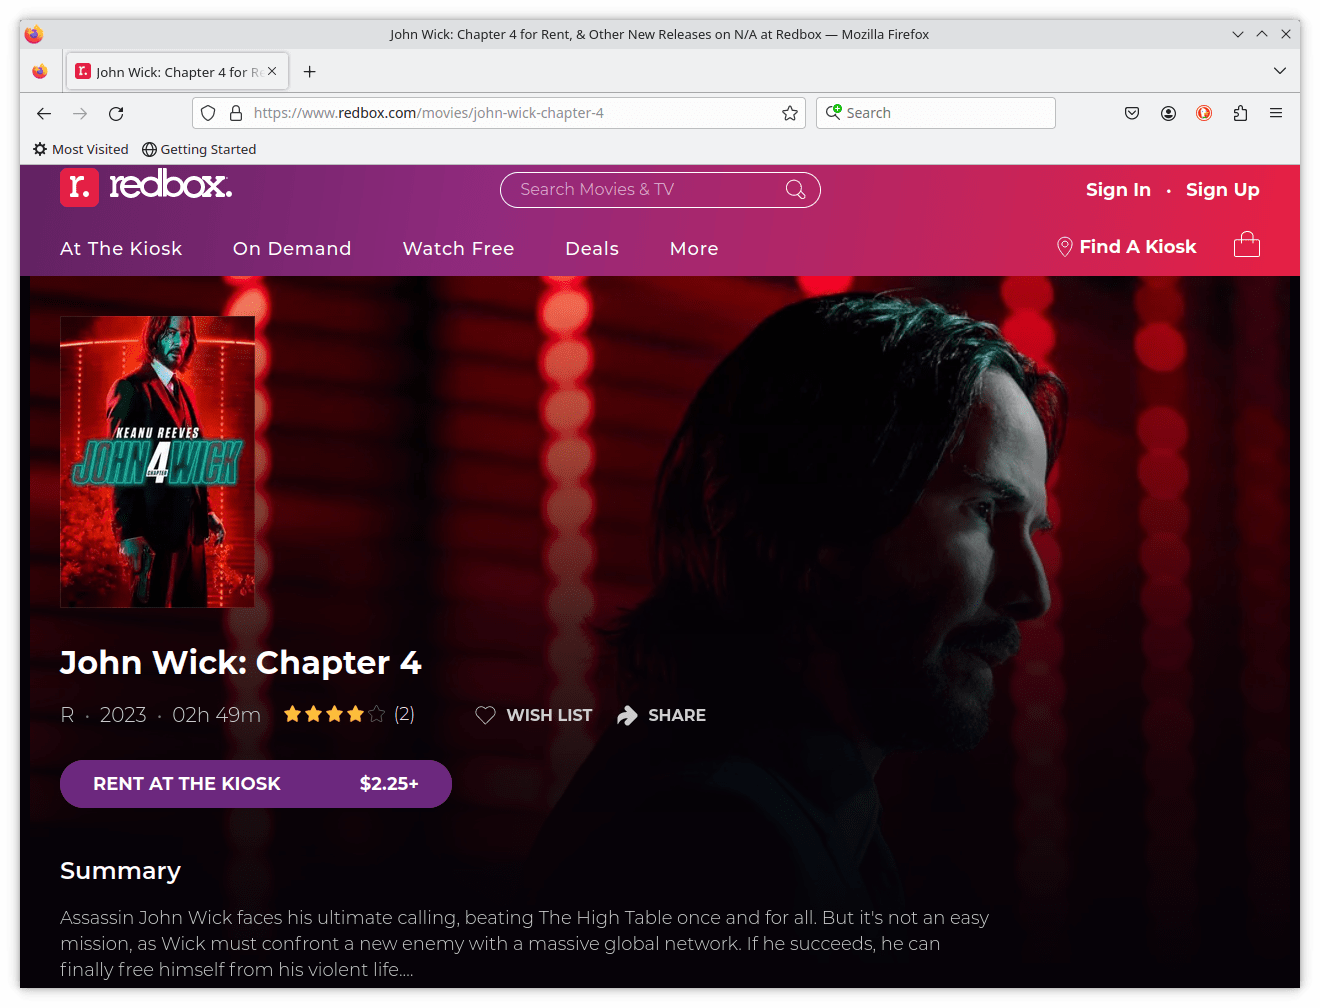 John Wick 4 available for Rent at Redbox